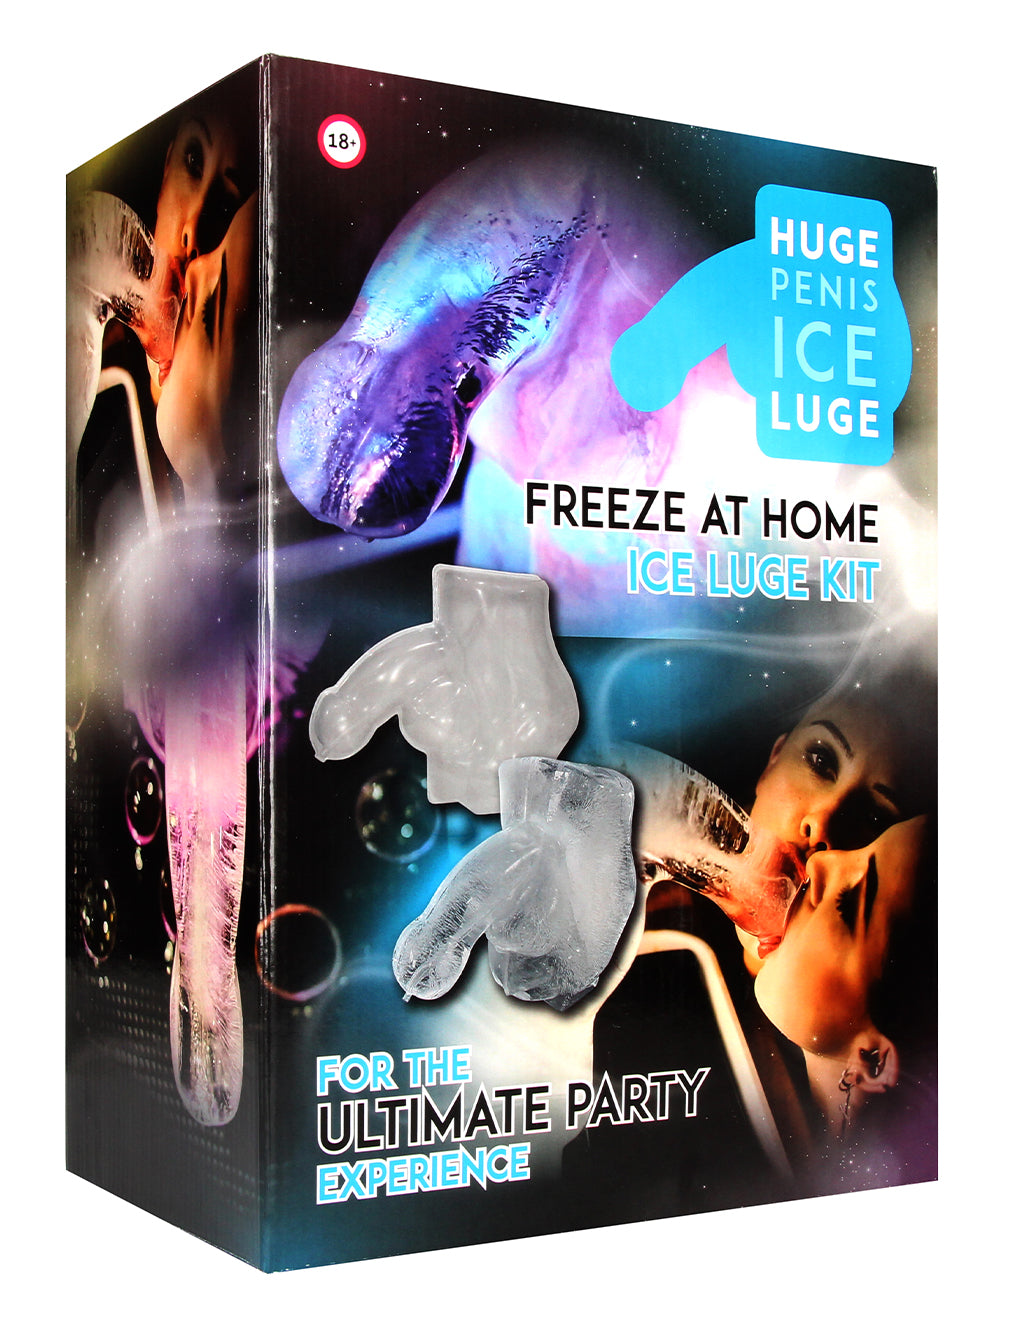 Huge Penis Ice Luge Freeze At Home- Package